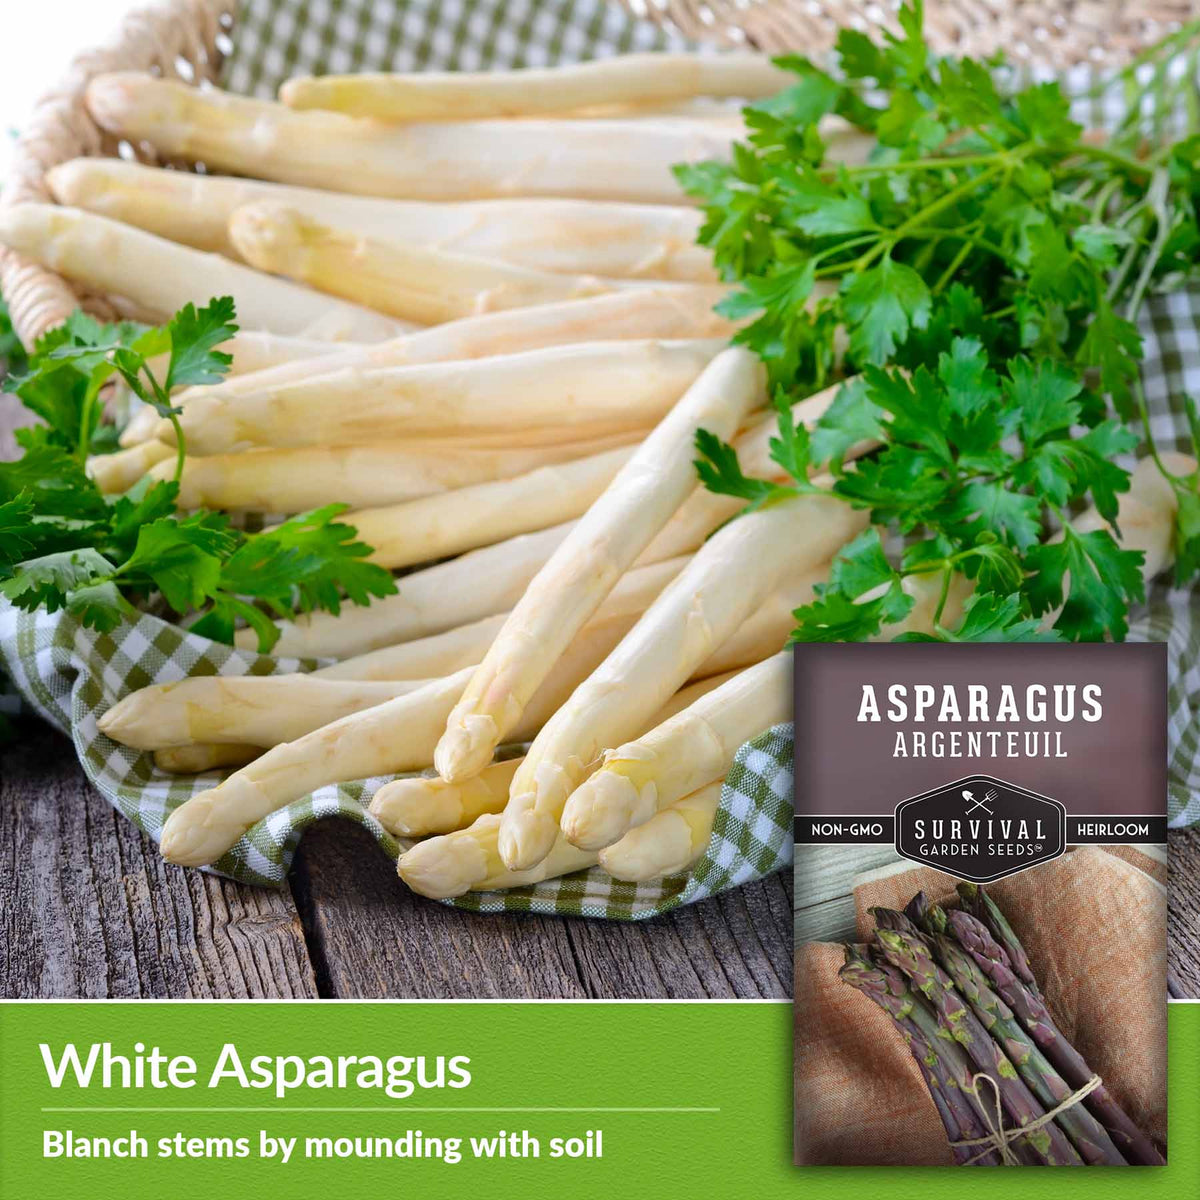 White Asparagus - Blanch stems by mounding with soil